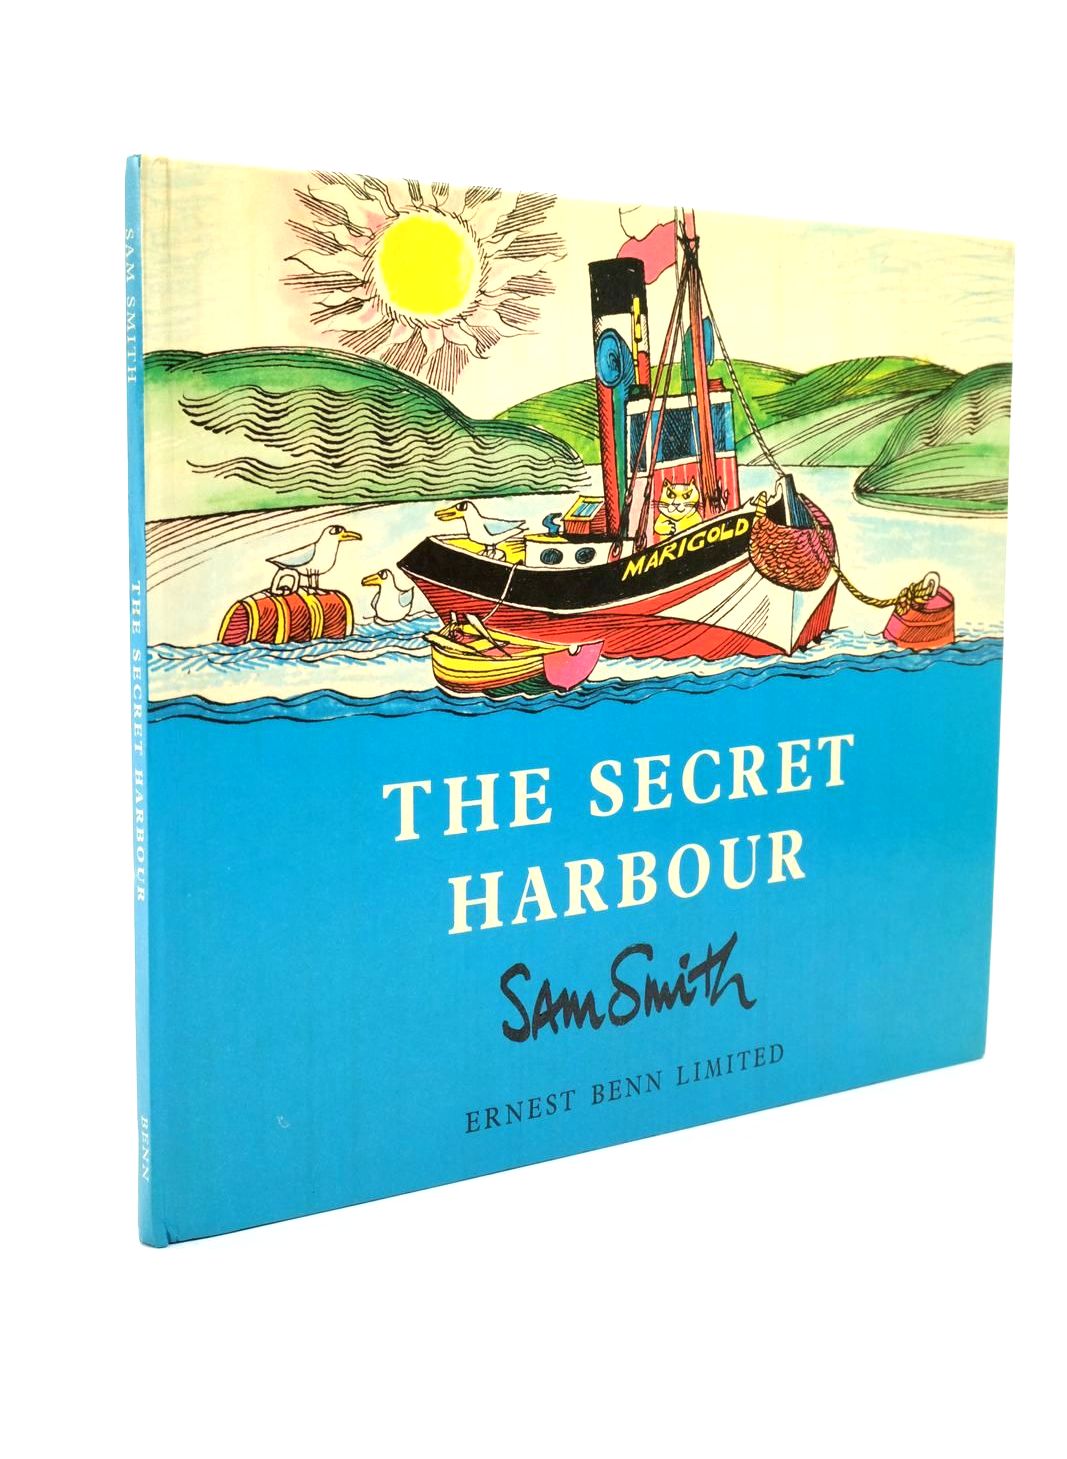 Photo of THE SECRET HARBOUR written by Smith, Sam illustrated by Smith, Sam published by Ernest Benn Limited (STOCK CODE: 1322752)  for sale by Stella & Rose's Books